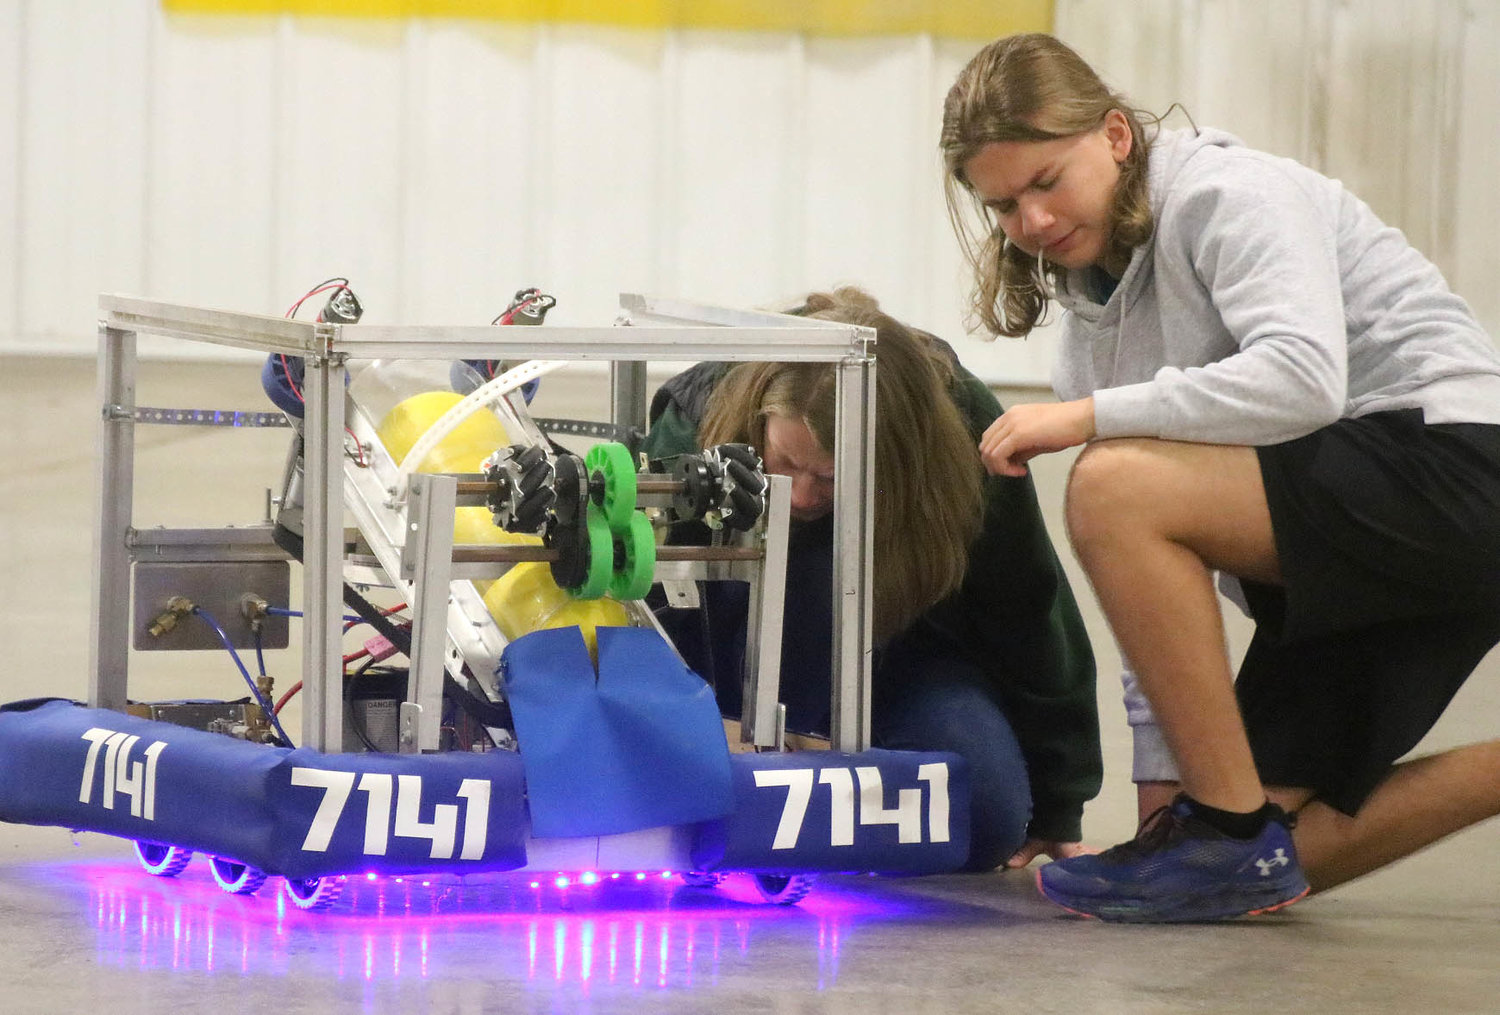 Students with the Lee County Robotics team look over a "Big Bot" that was built last year for a basketball shooting game created by the team at Fort Madison High School. Photo by Chuck Vandenberg/PCC